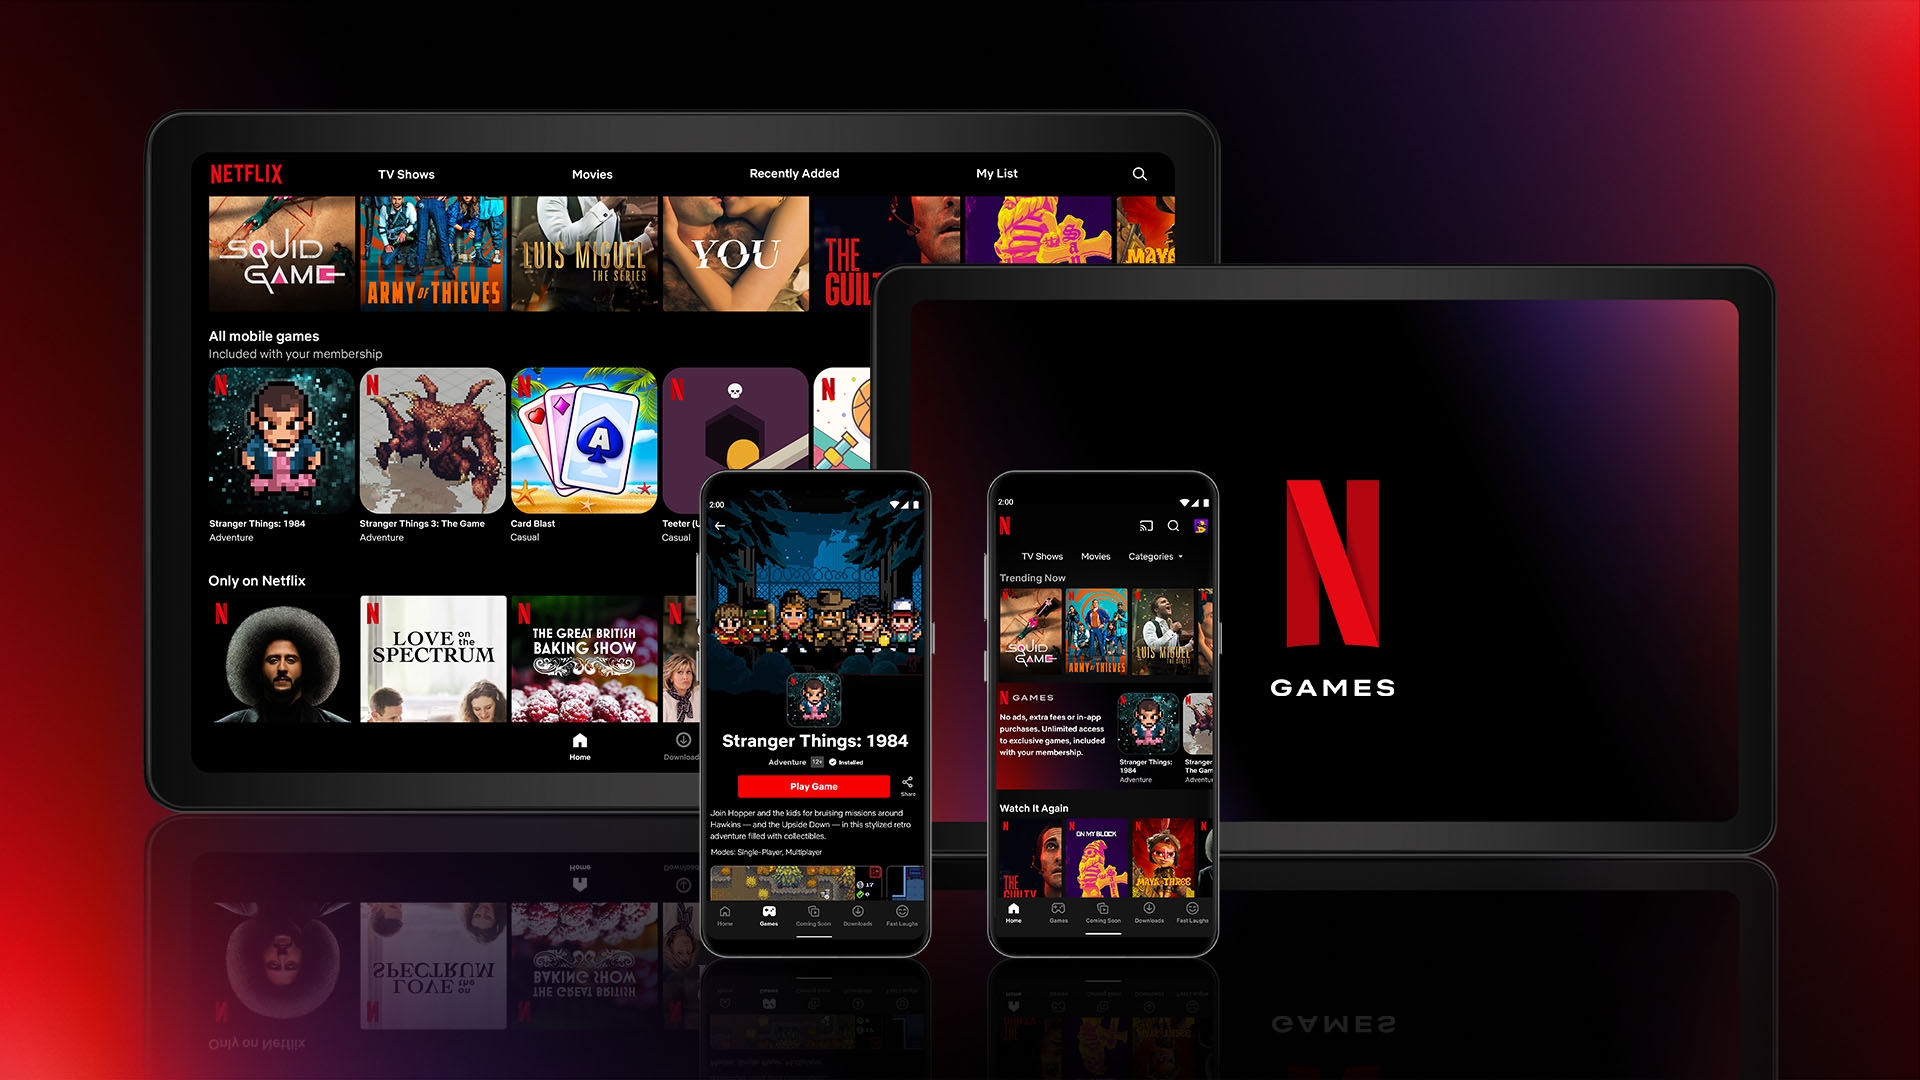 Online streaming giant offers a variety of games to its users, so today, we are going over how to play Netflix games and the most out of your subscription.